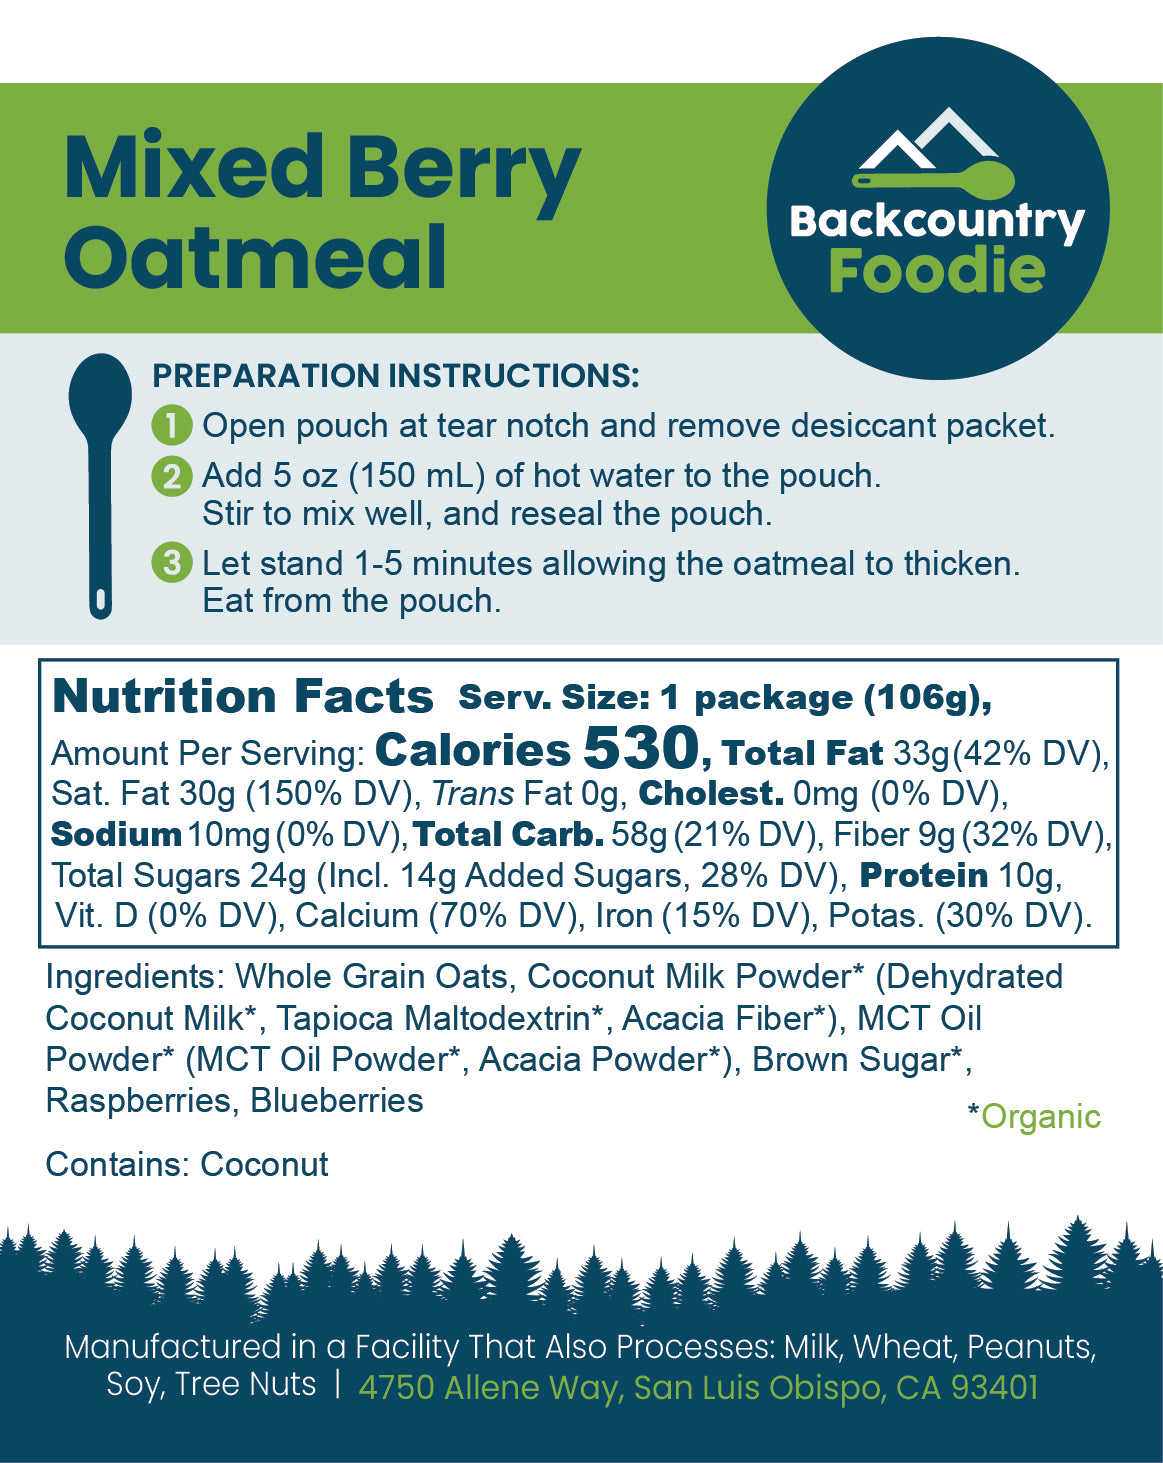 Backcountry Foodie - Mixed Berry Oatmeal